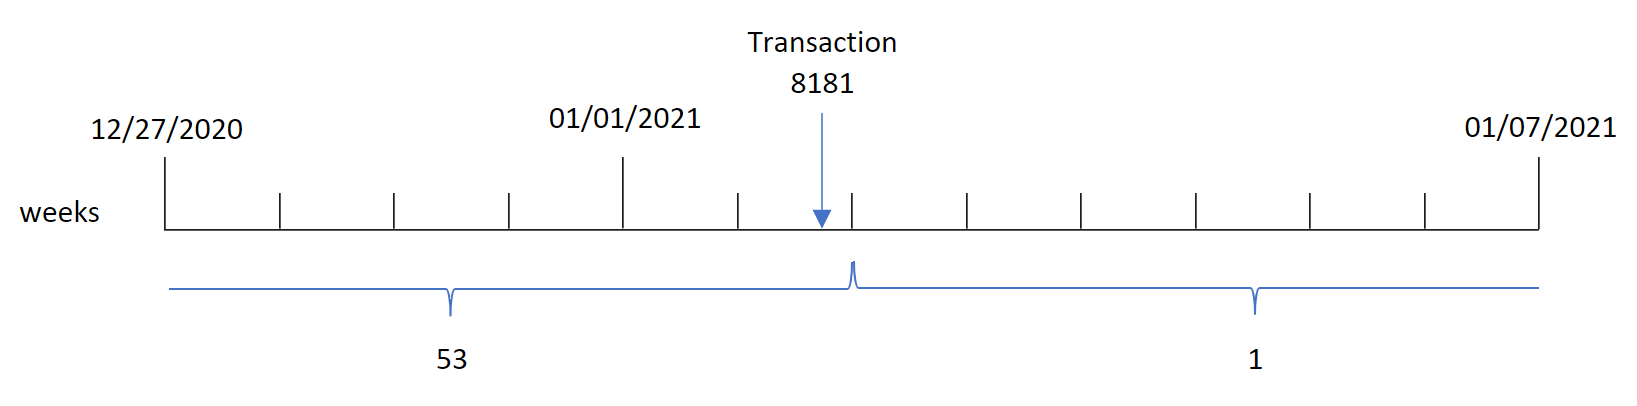 Diagram that shows how the weekyear() function works with unbroken weeks and that week 53 has days in 2020 and 2021. Transaction 8181 takes place on January 2 but the weekyear() function identifies its year as 2020 because of the unbroken weeks. 